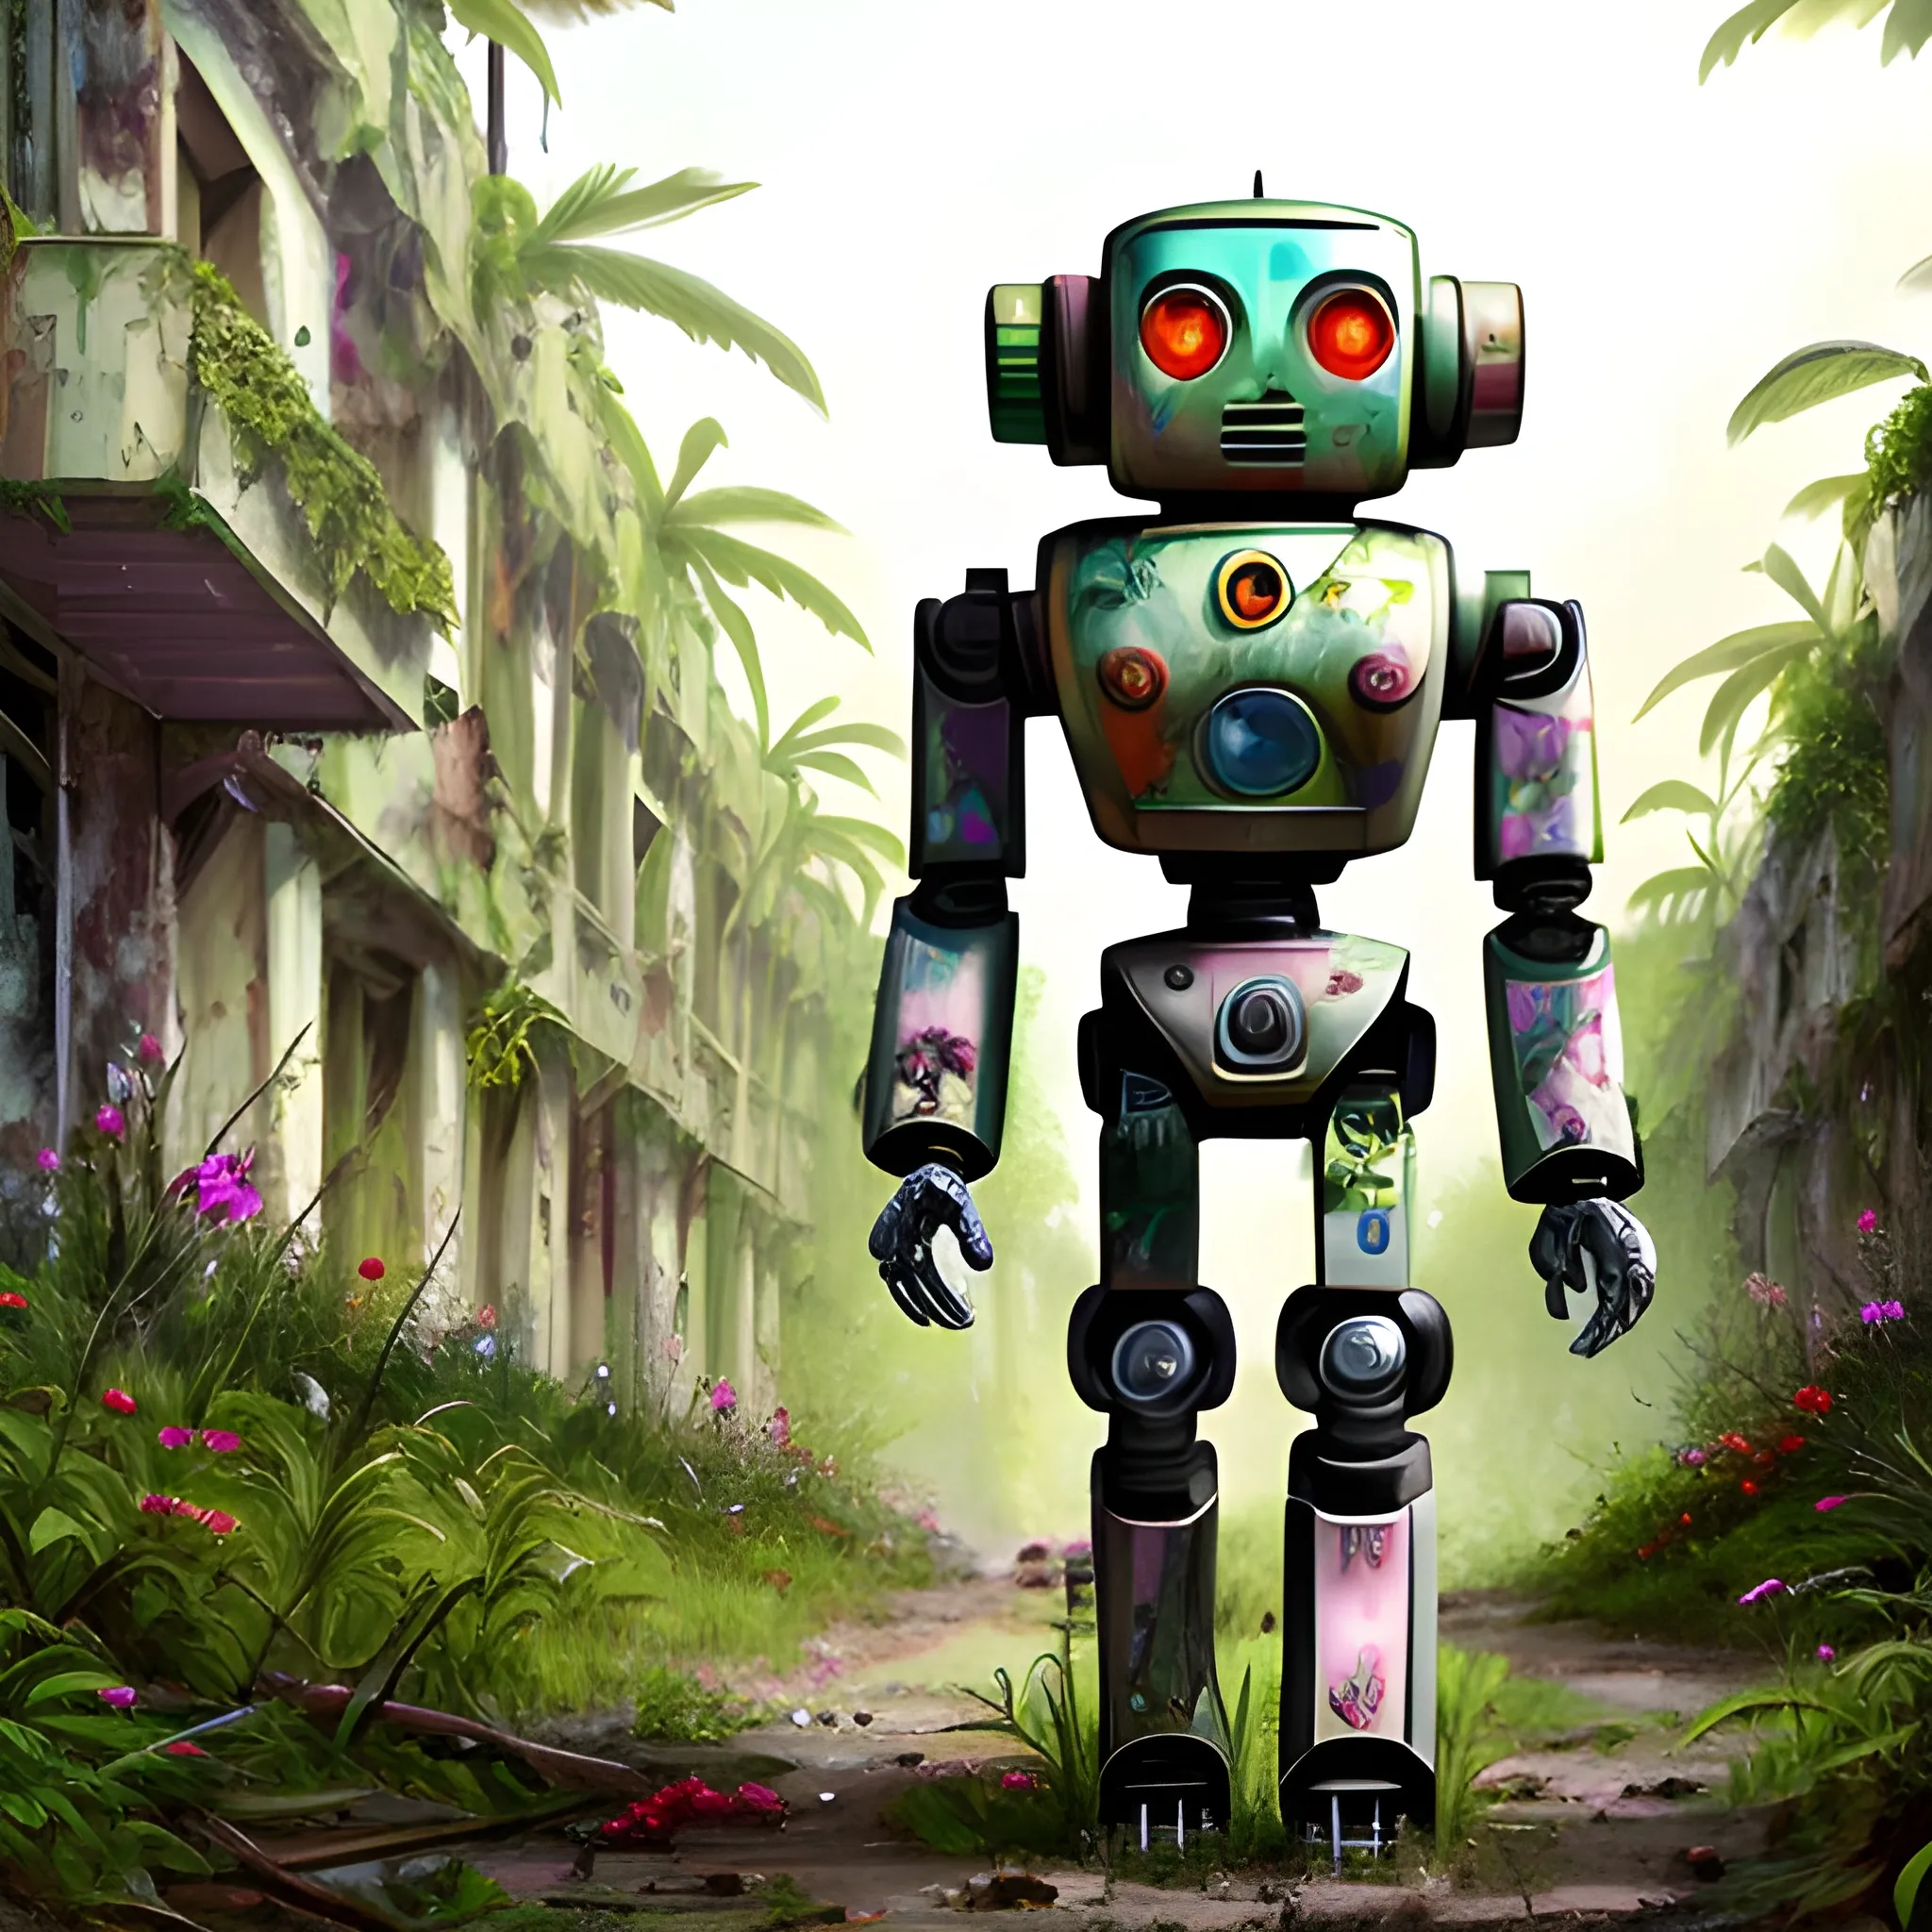 very sophisticated robot walking in an abandoned ruined city overgrown with lush vegetation with very colorful flowers